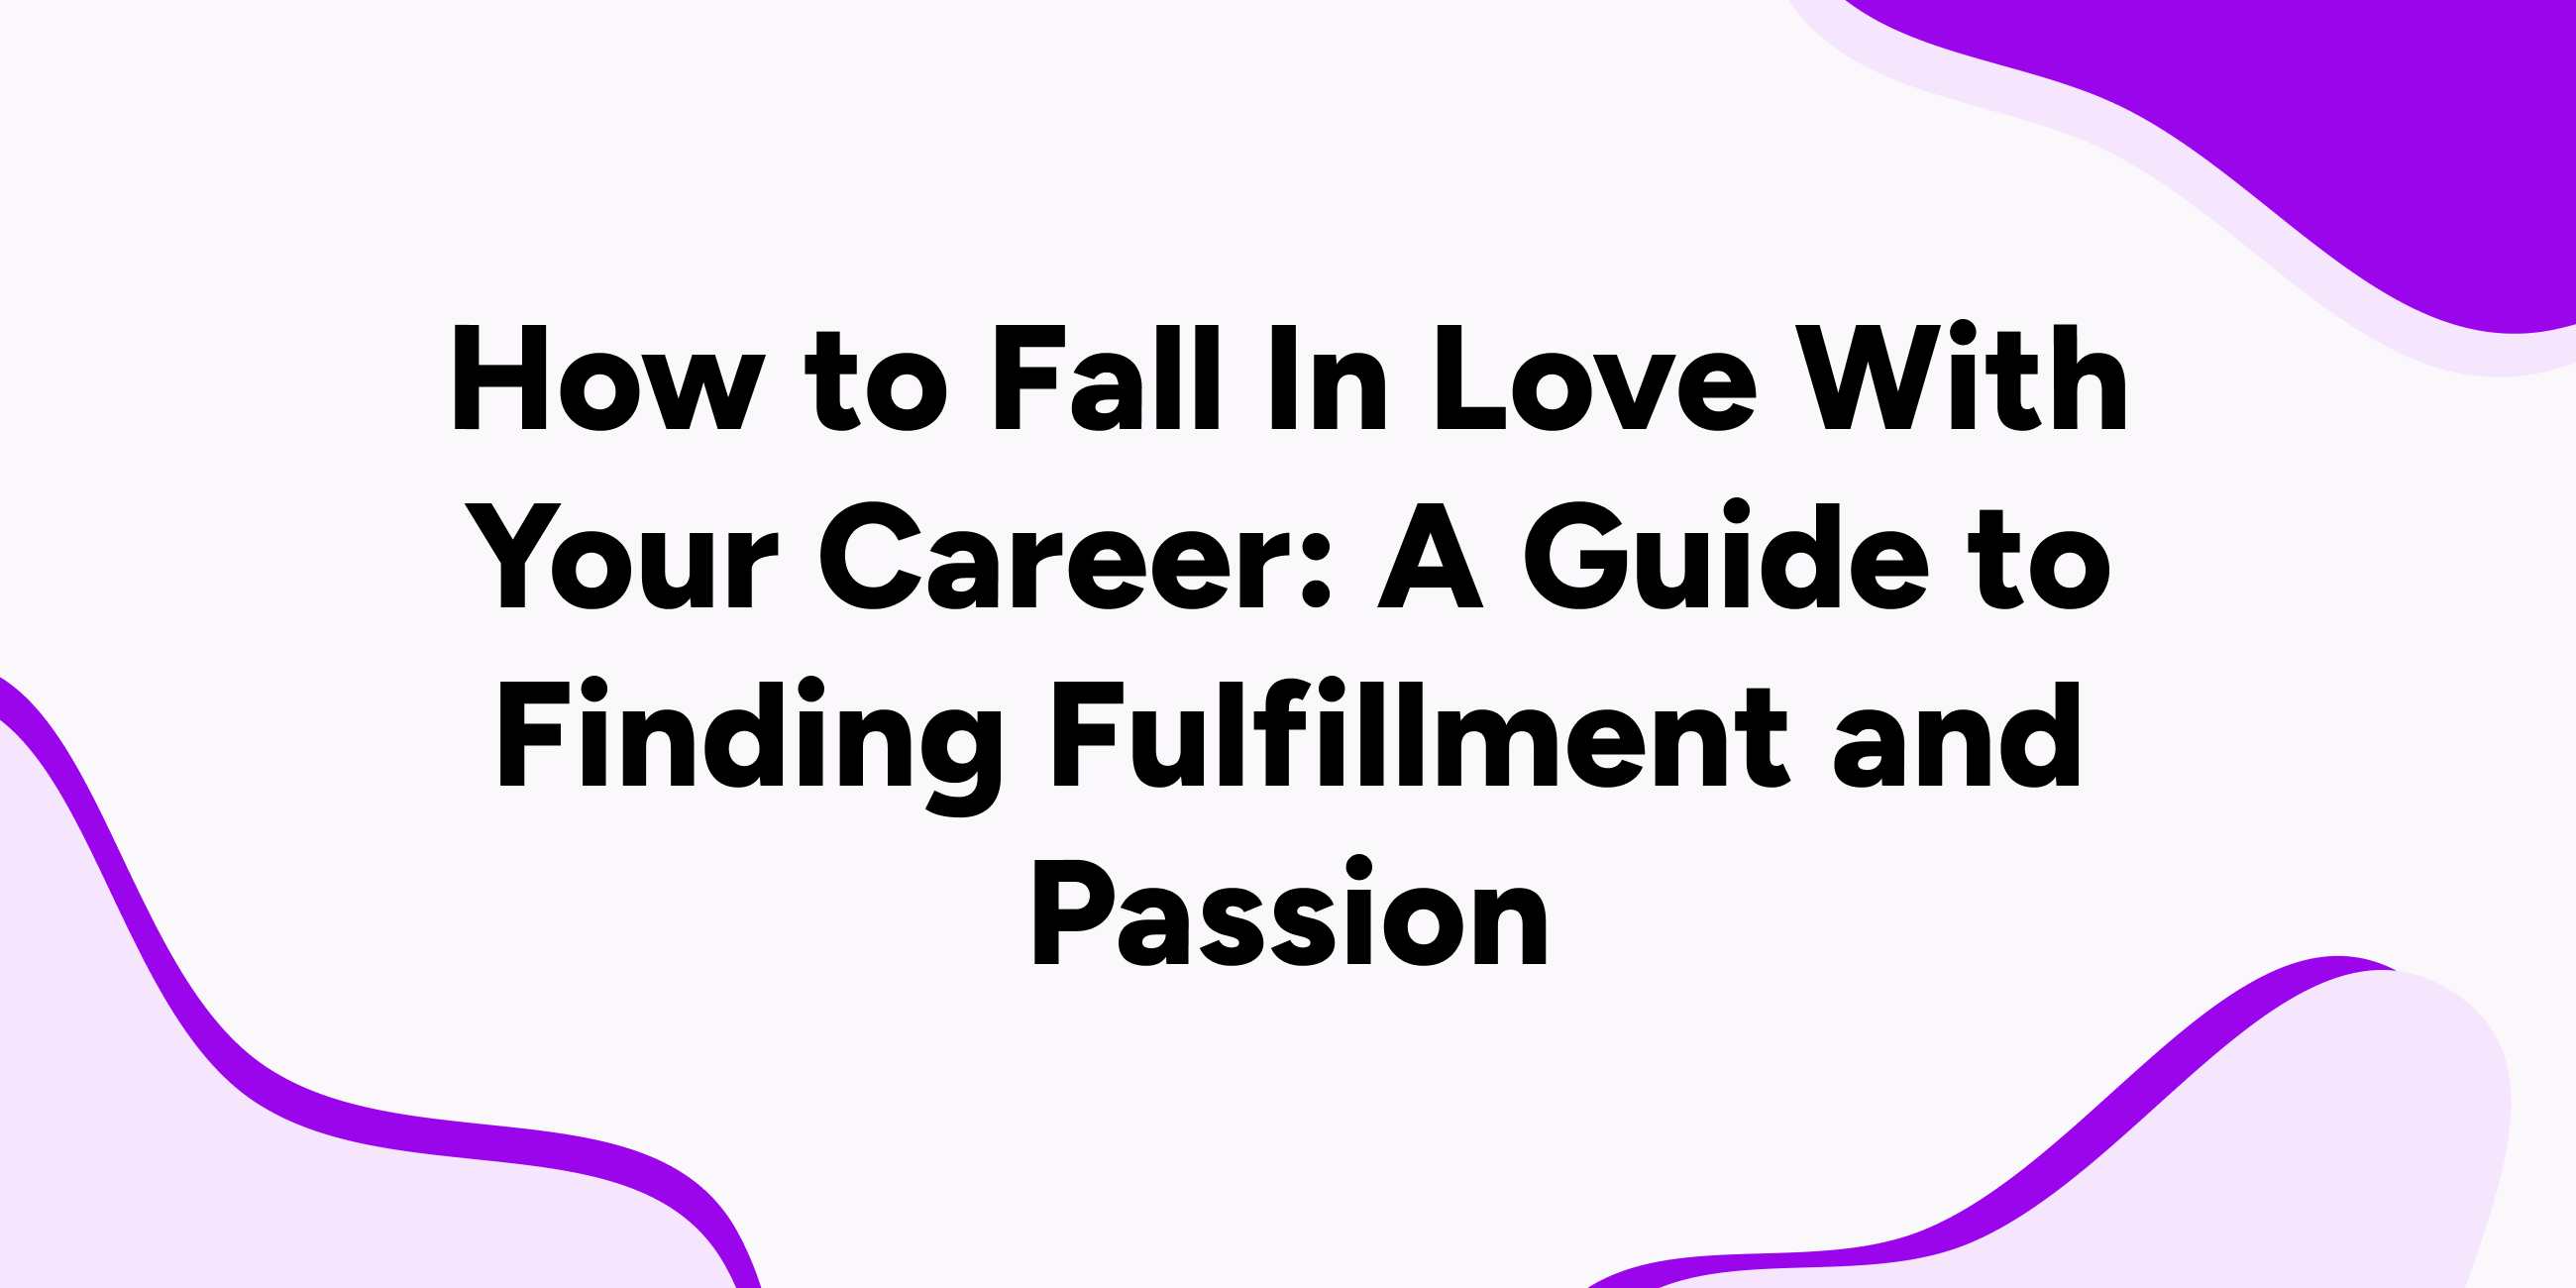 How to Fall In Love With Your Career